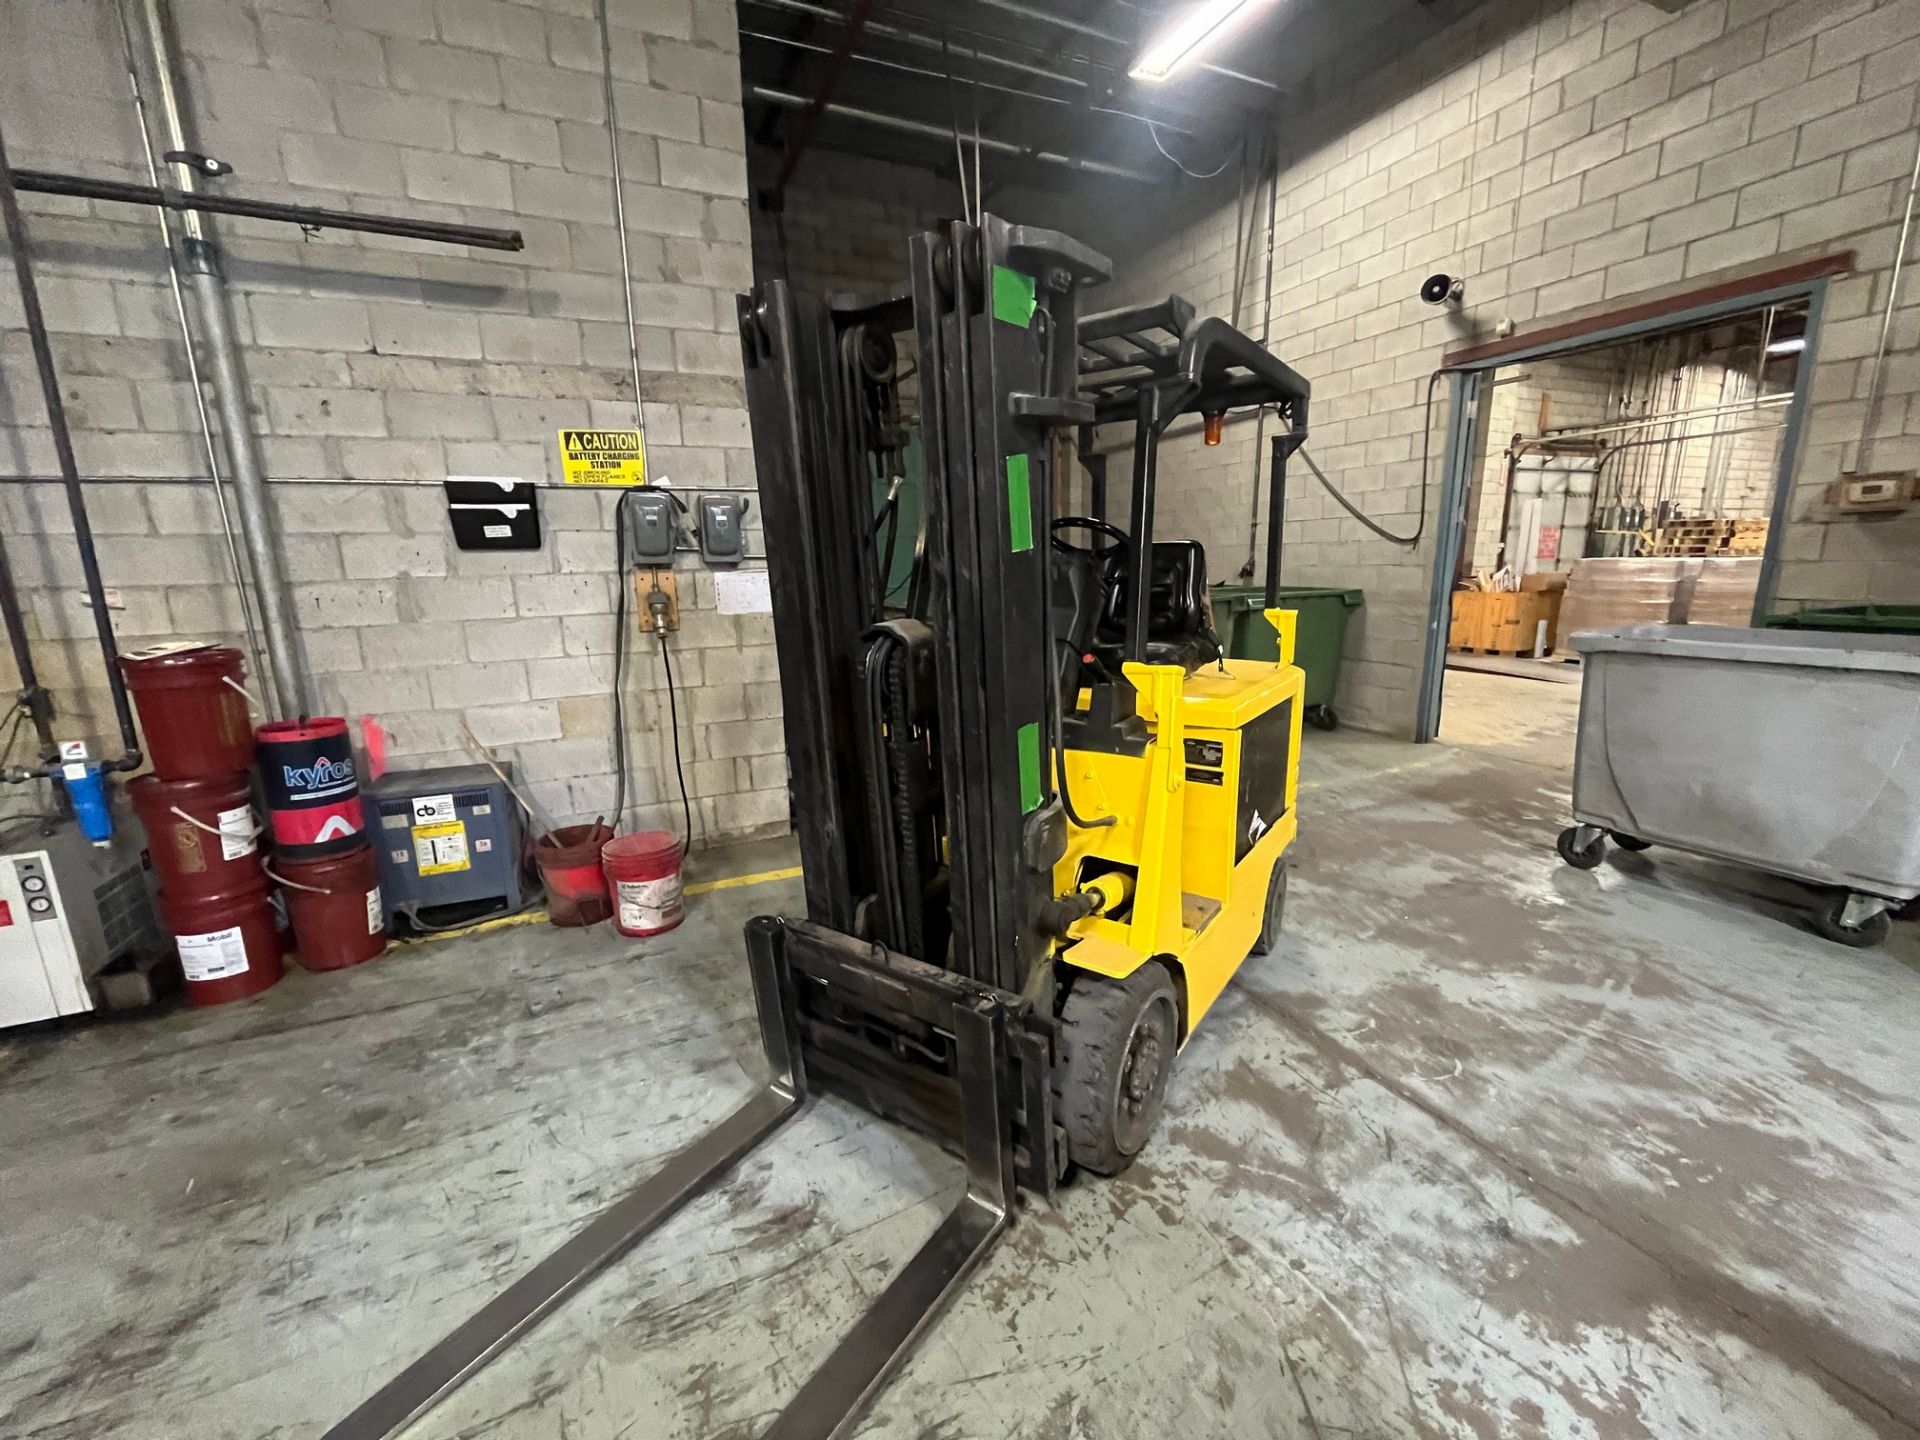 CATERPILLAR 2FC25 ELECTRIC FORKLIFT, 5,000LB CAP., 26V, 190" MAX LIFT, 3-STAGE MAST, CHARGER AND - Image 5 of 10